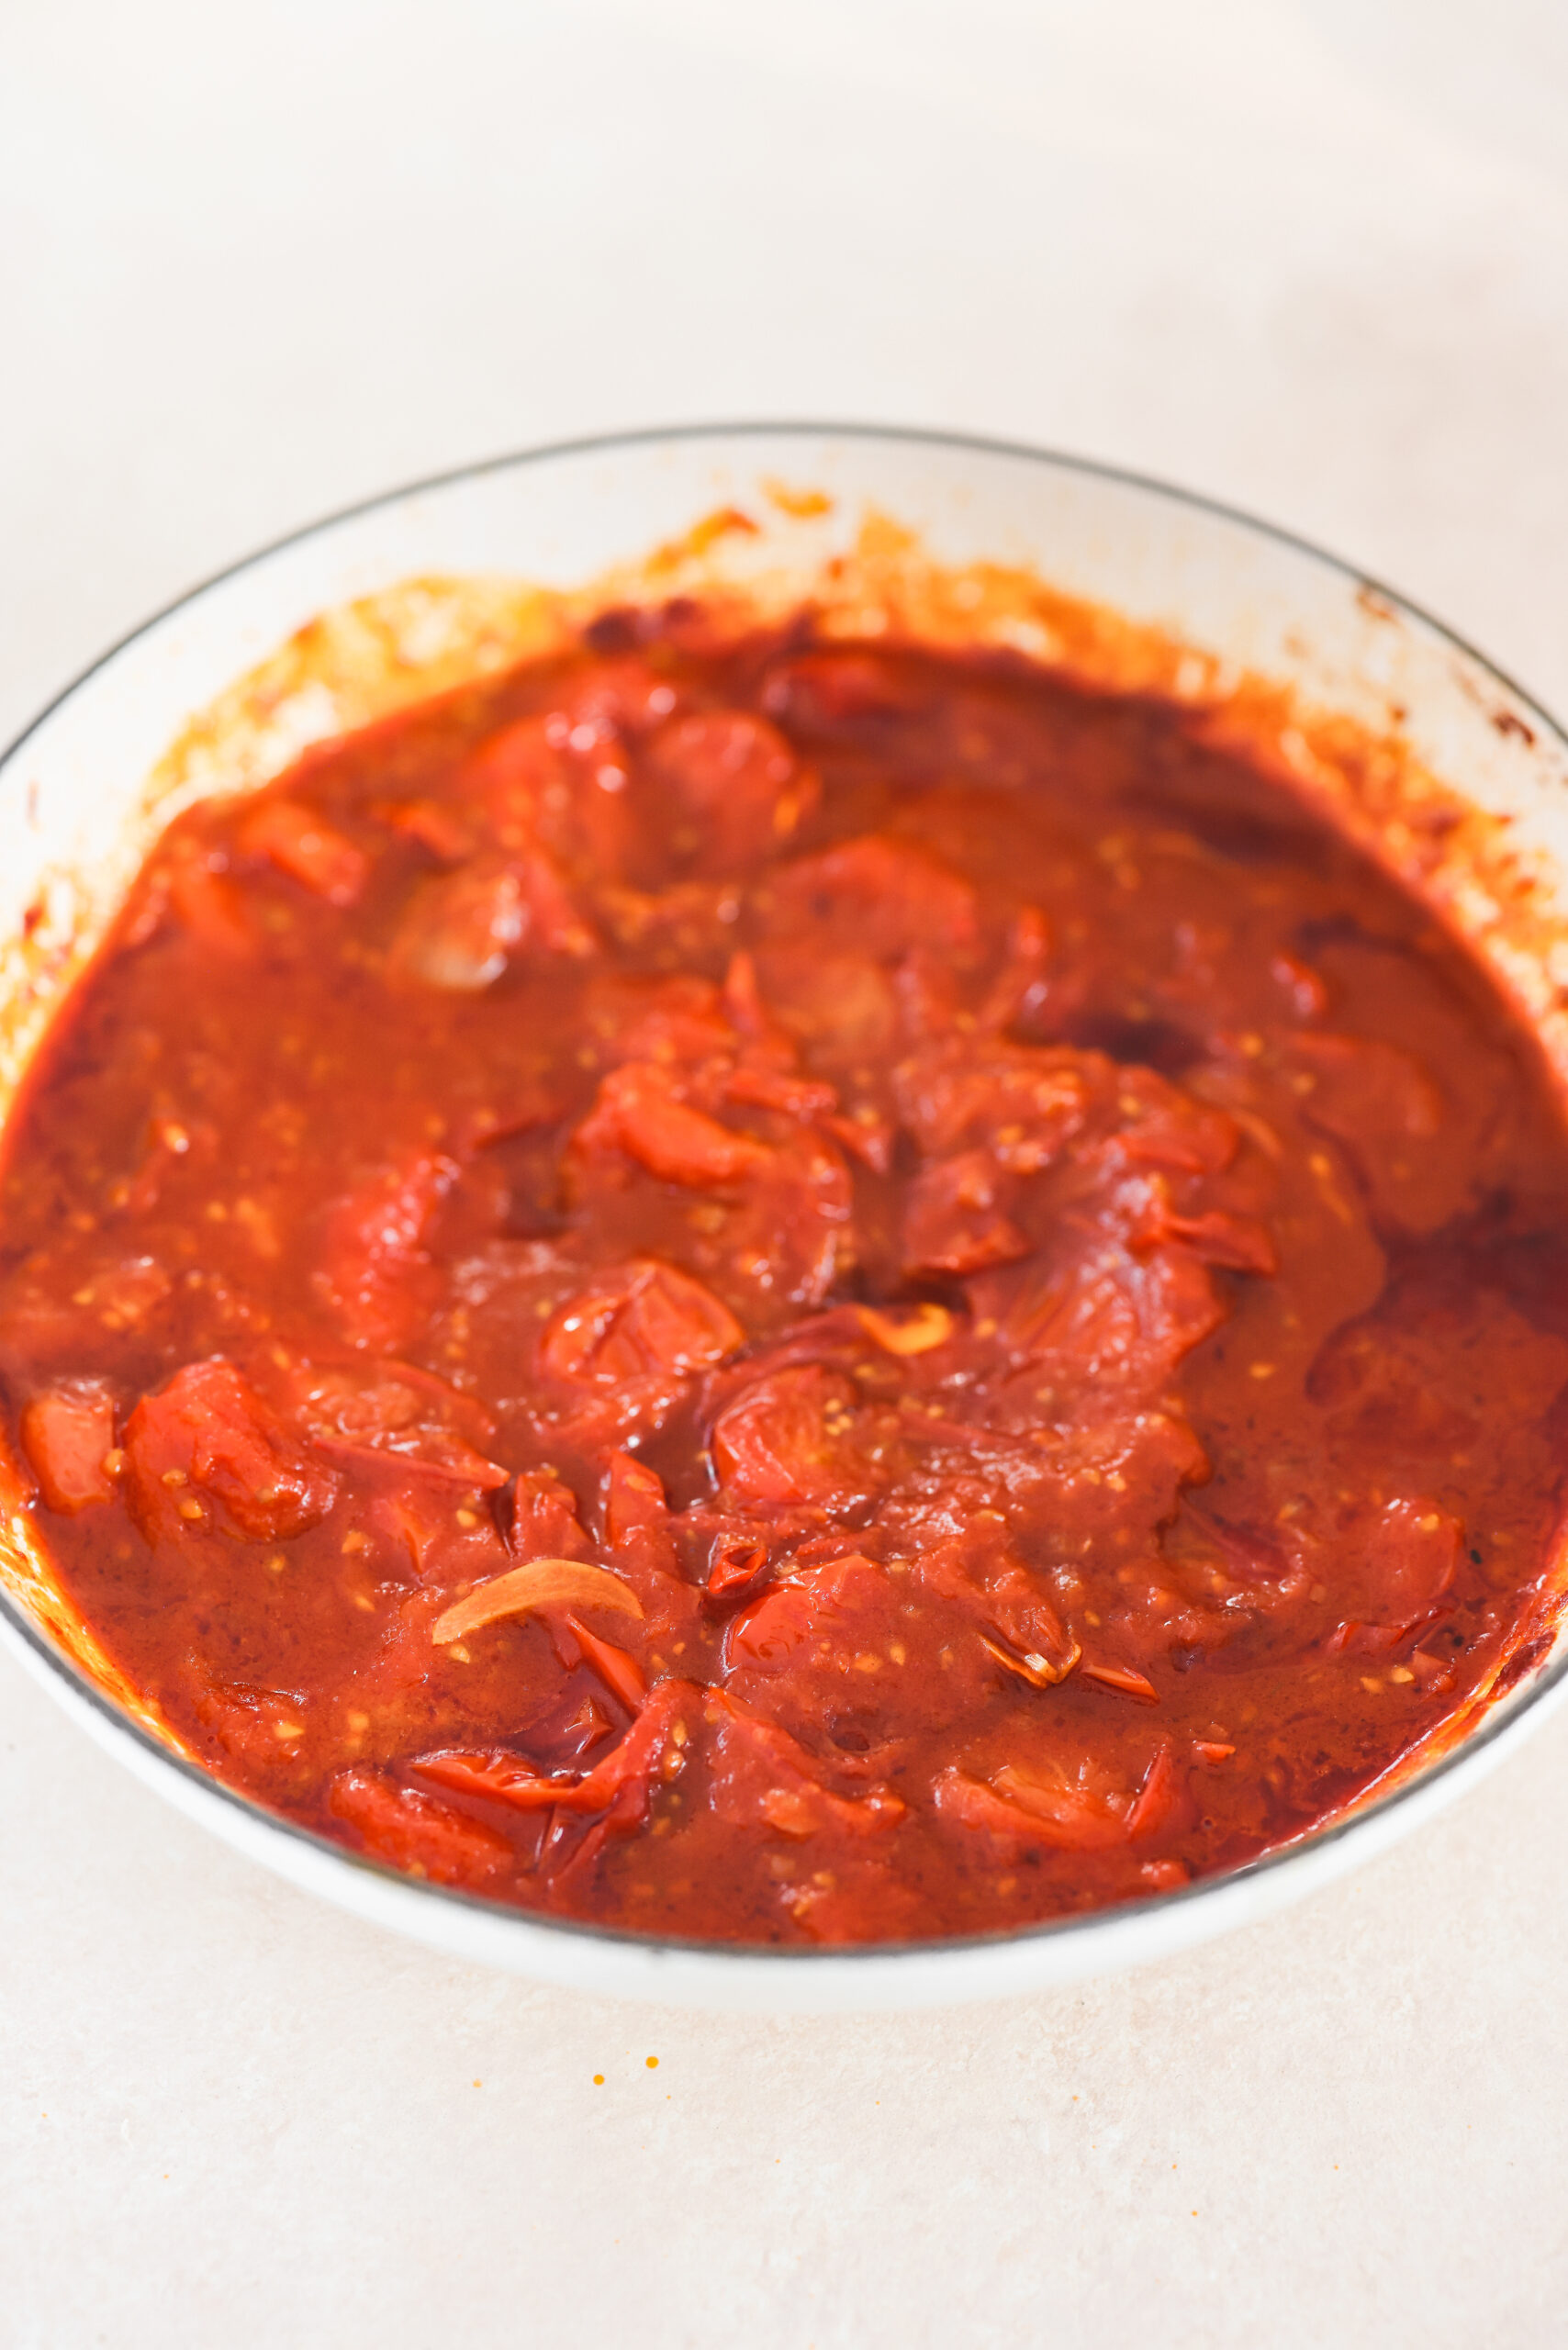 Cook tomato sauce in a pan